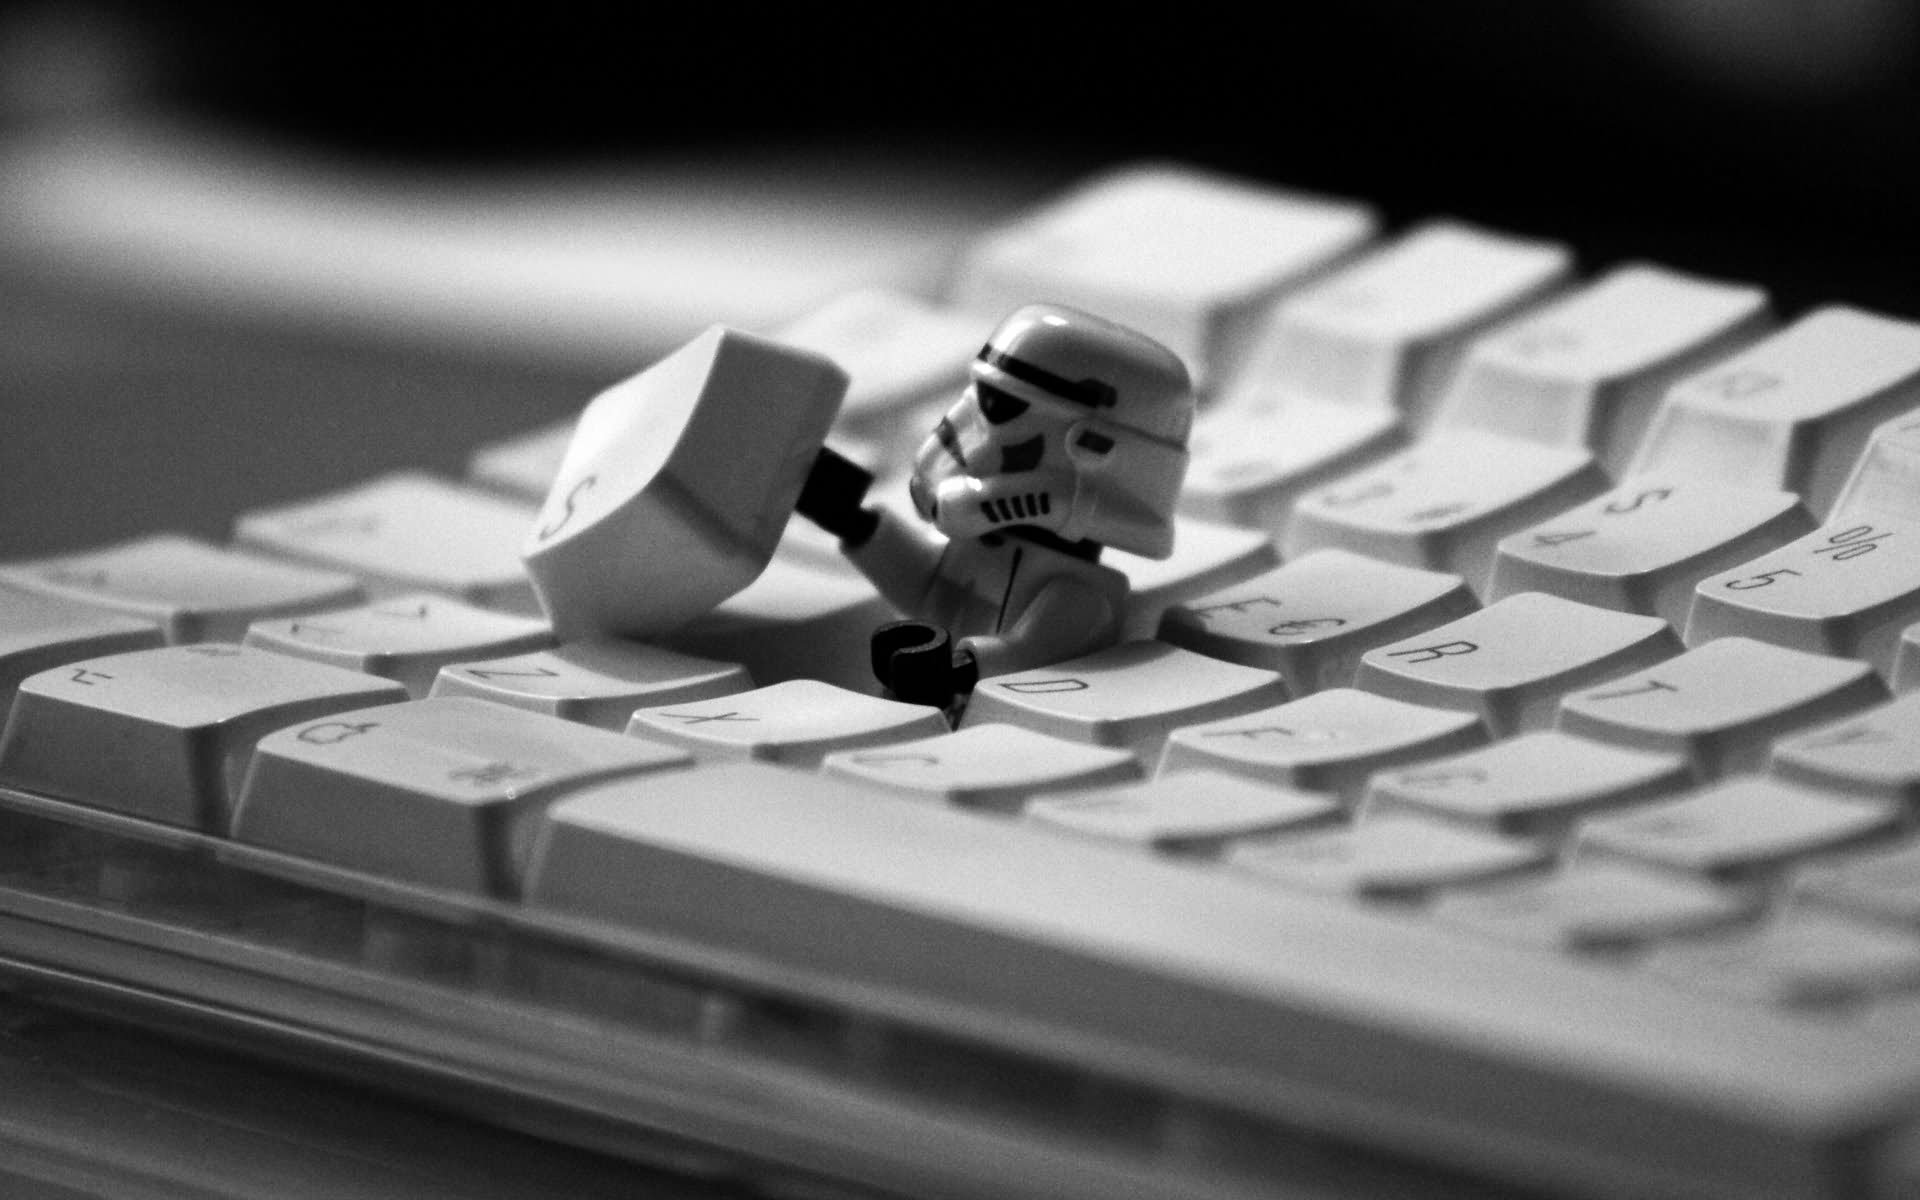 Darth Vader Comes Out From Keyboard Funny Star Wars Image